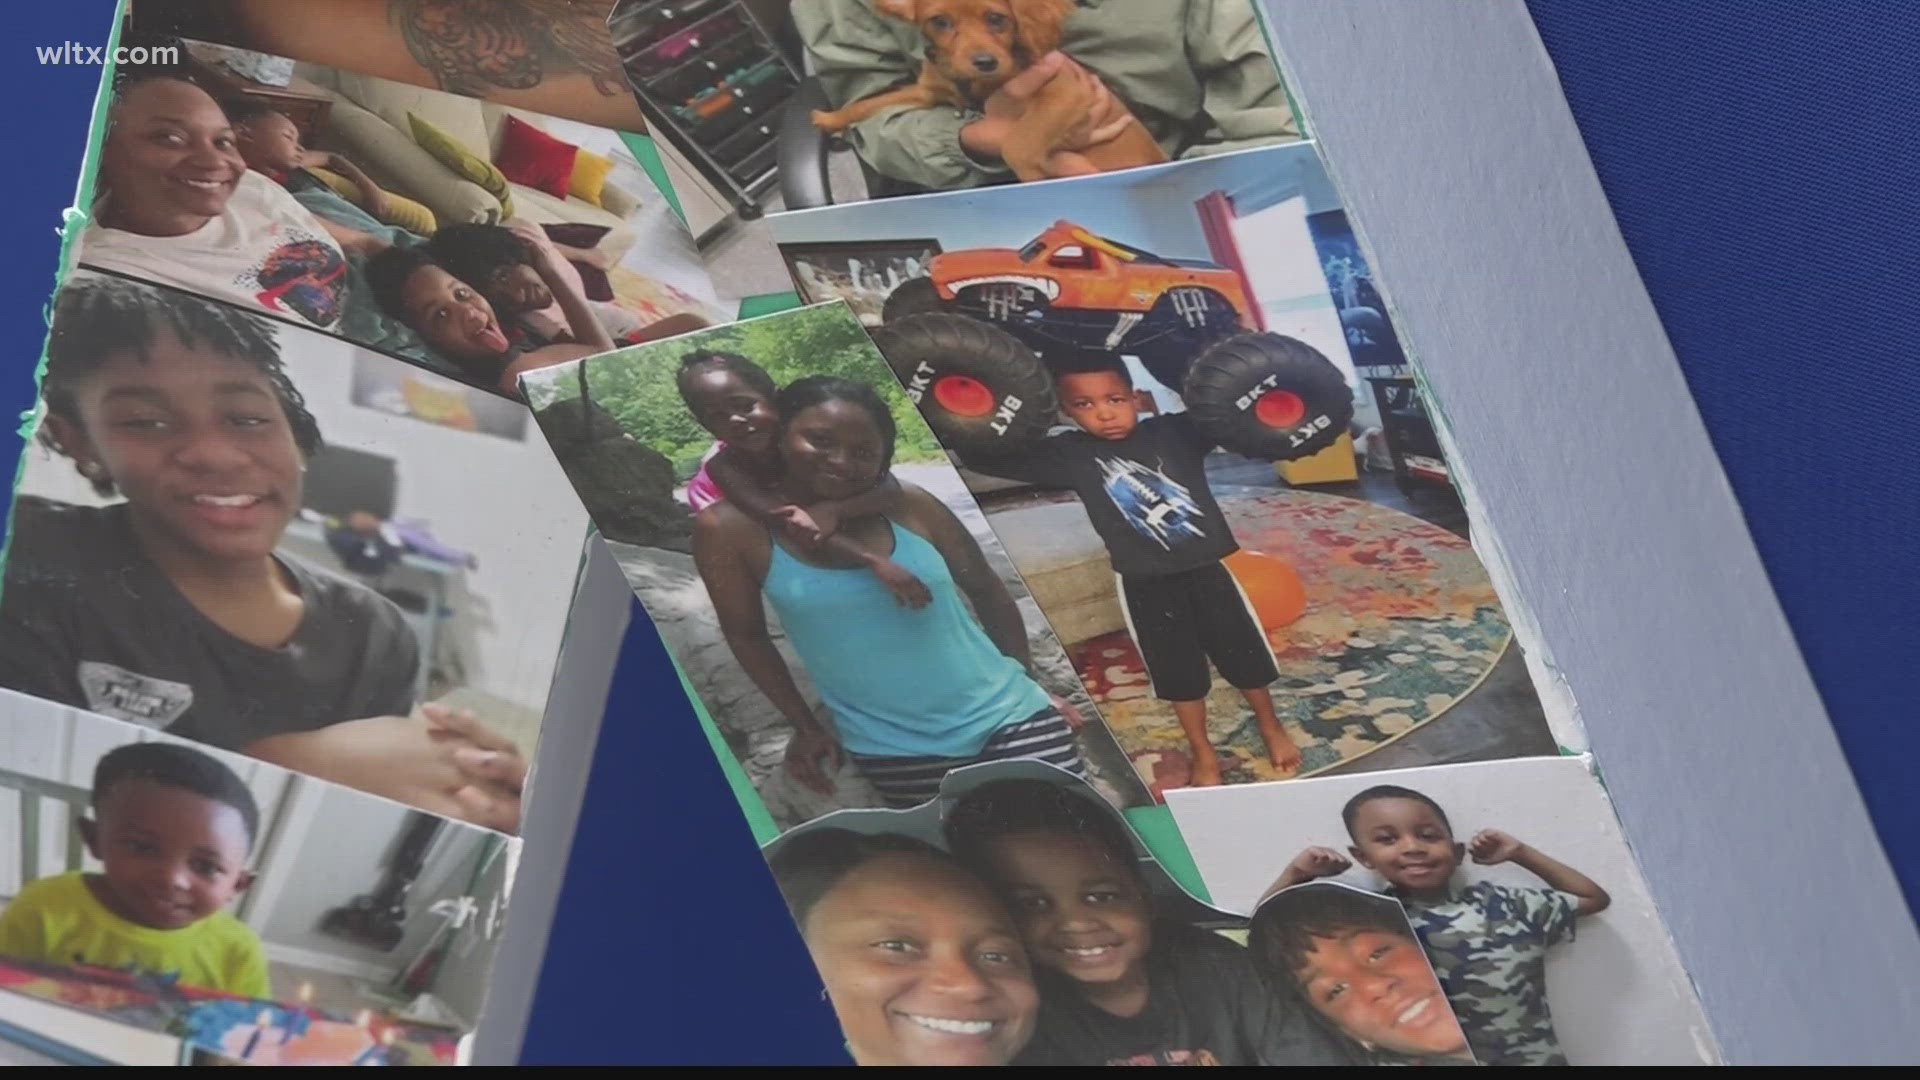 A Sumter family is staying strong as they continue to mourn the loss of three children killed last March.